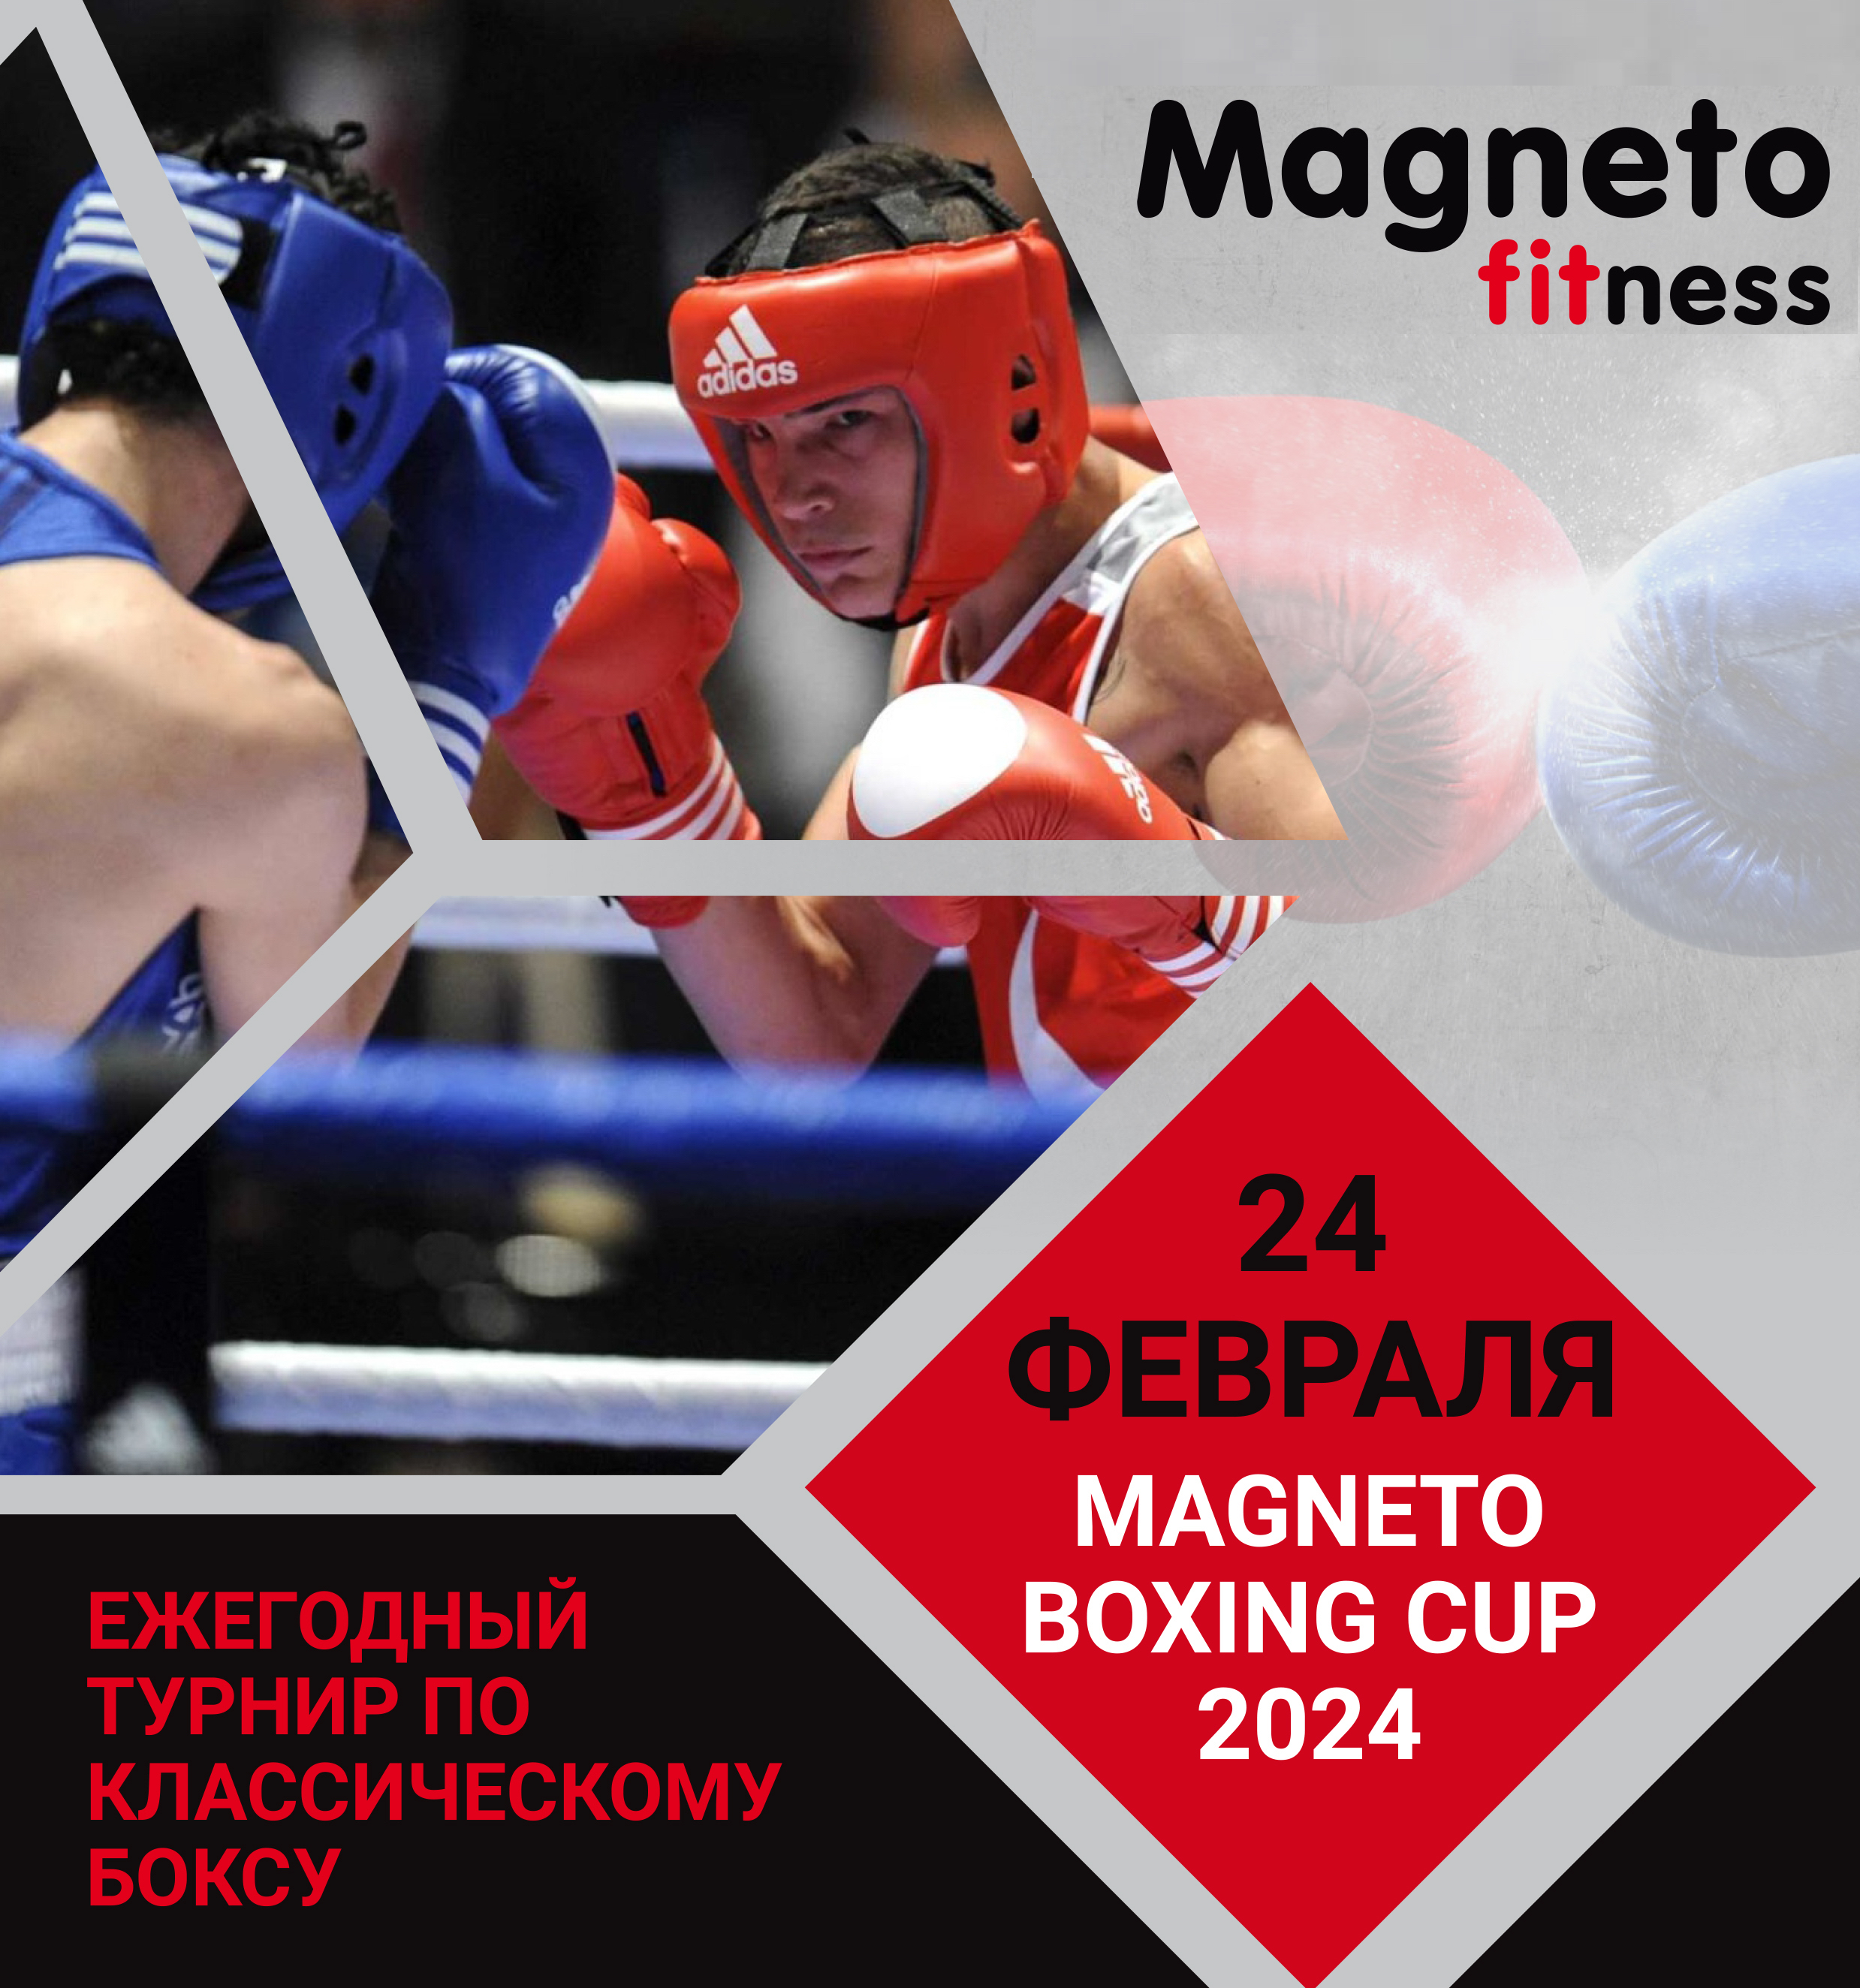 Magneto fitness cup 2024